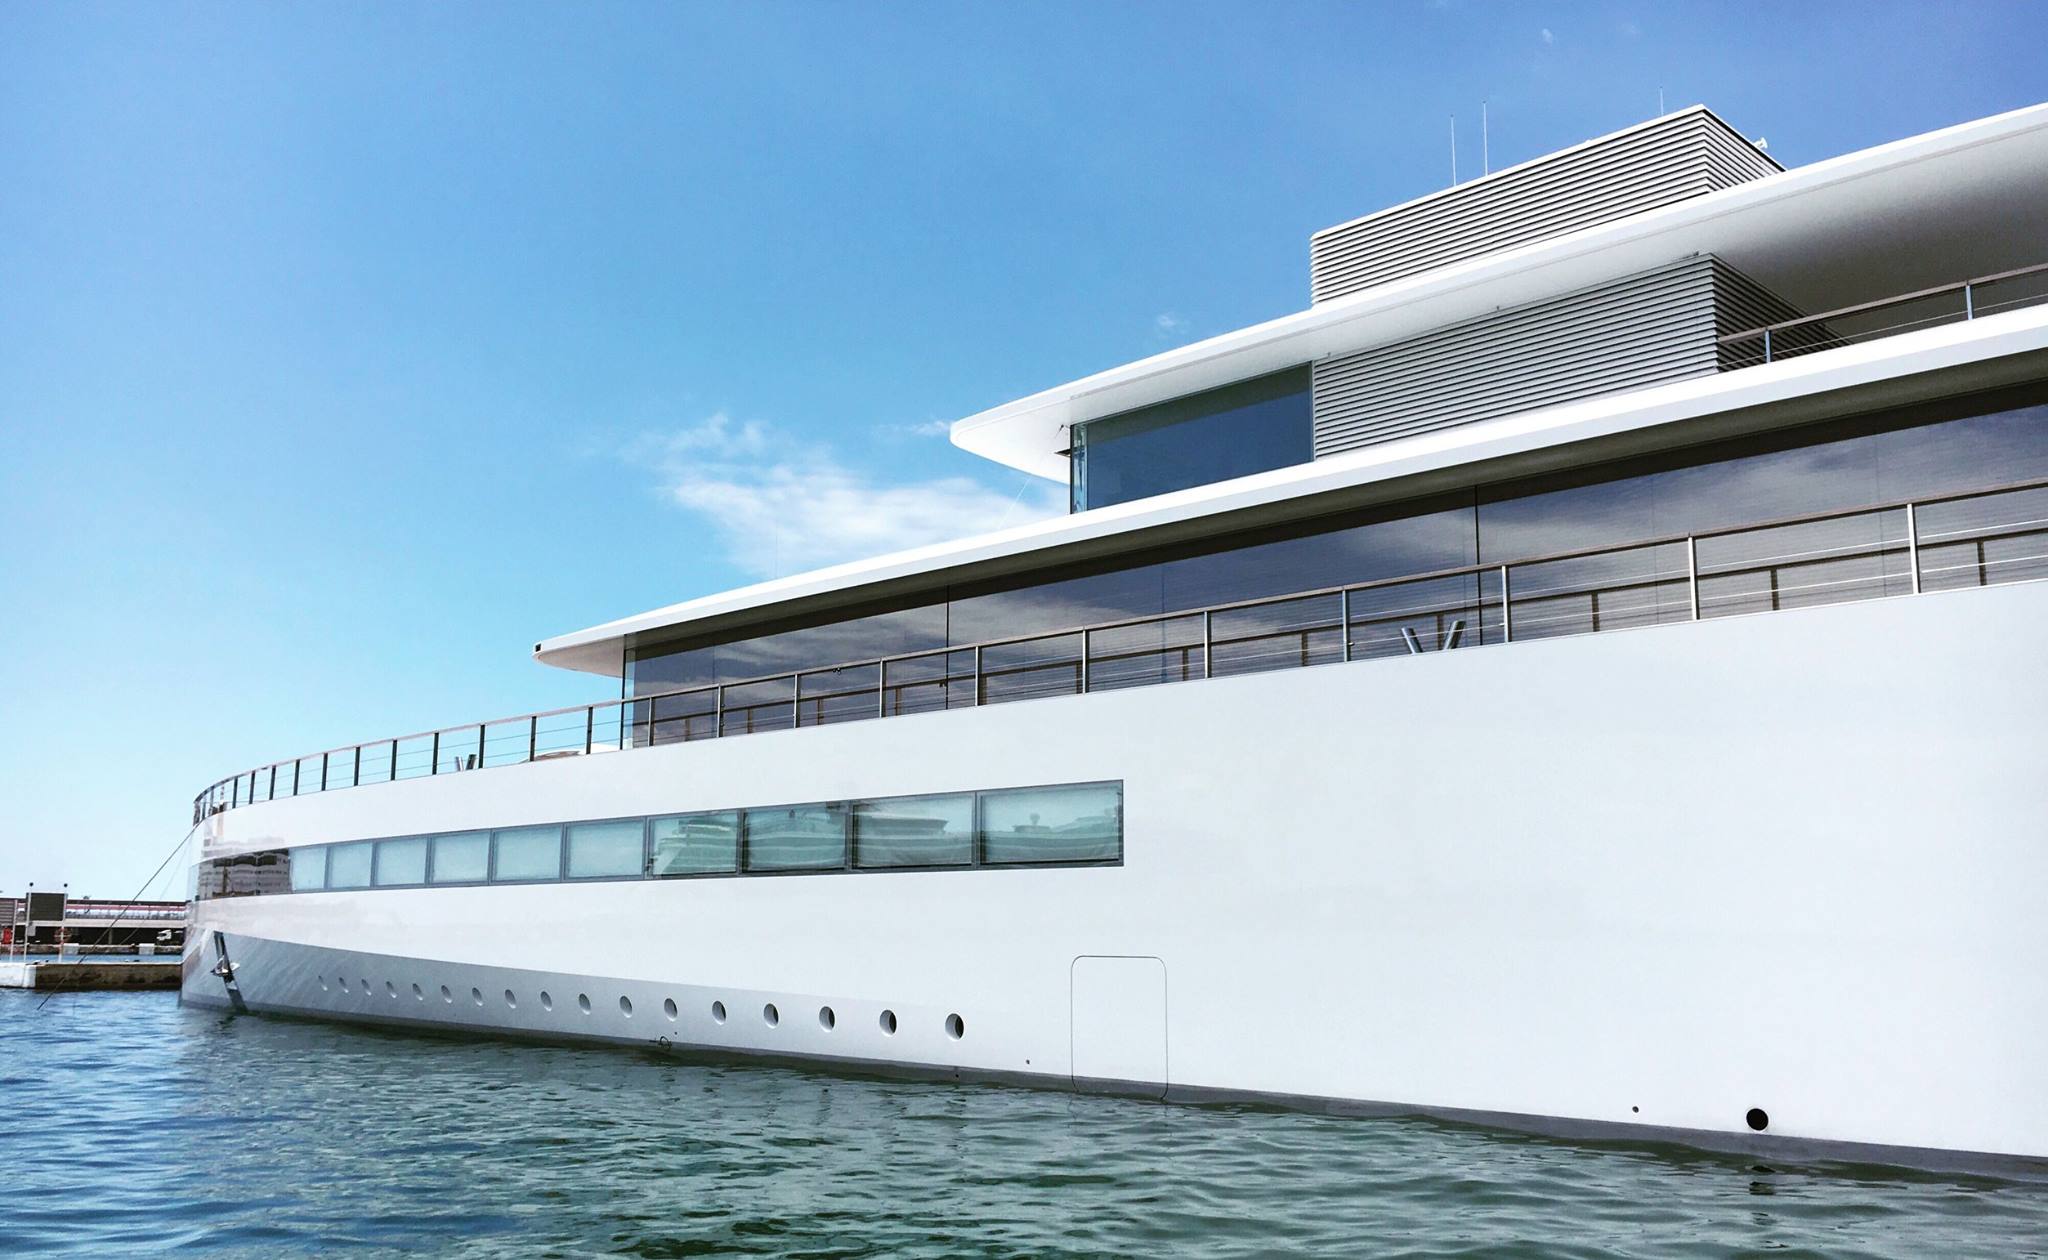 The super-yacht with a priceless piece of art in Majorca